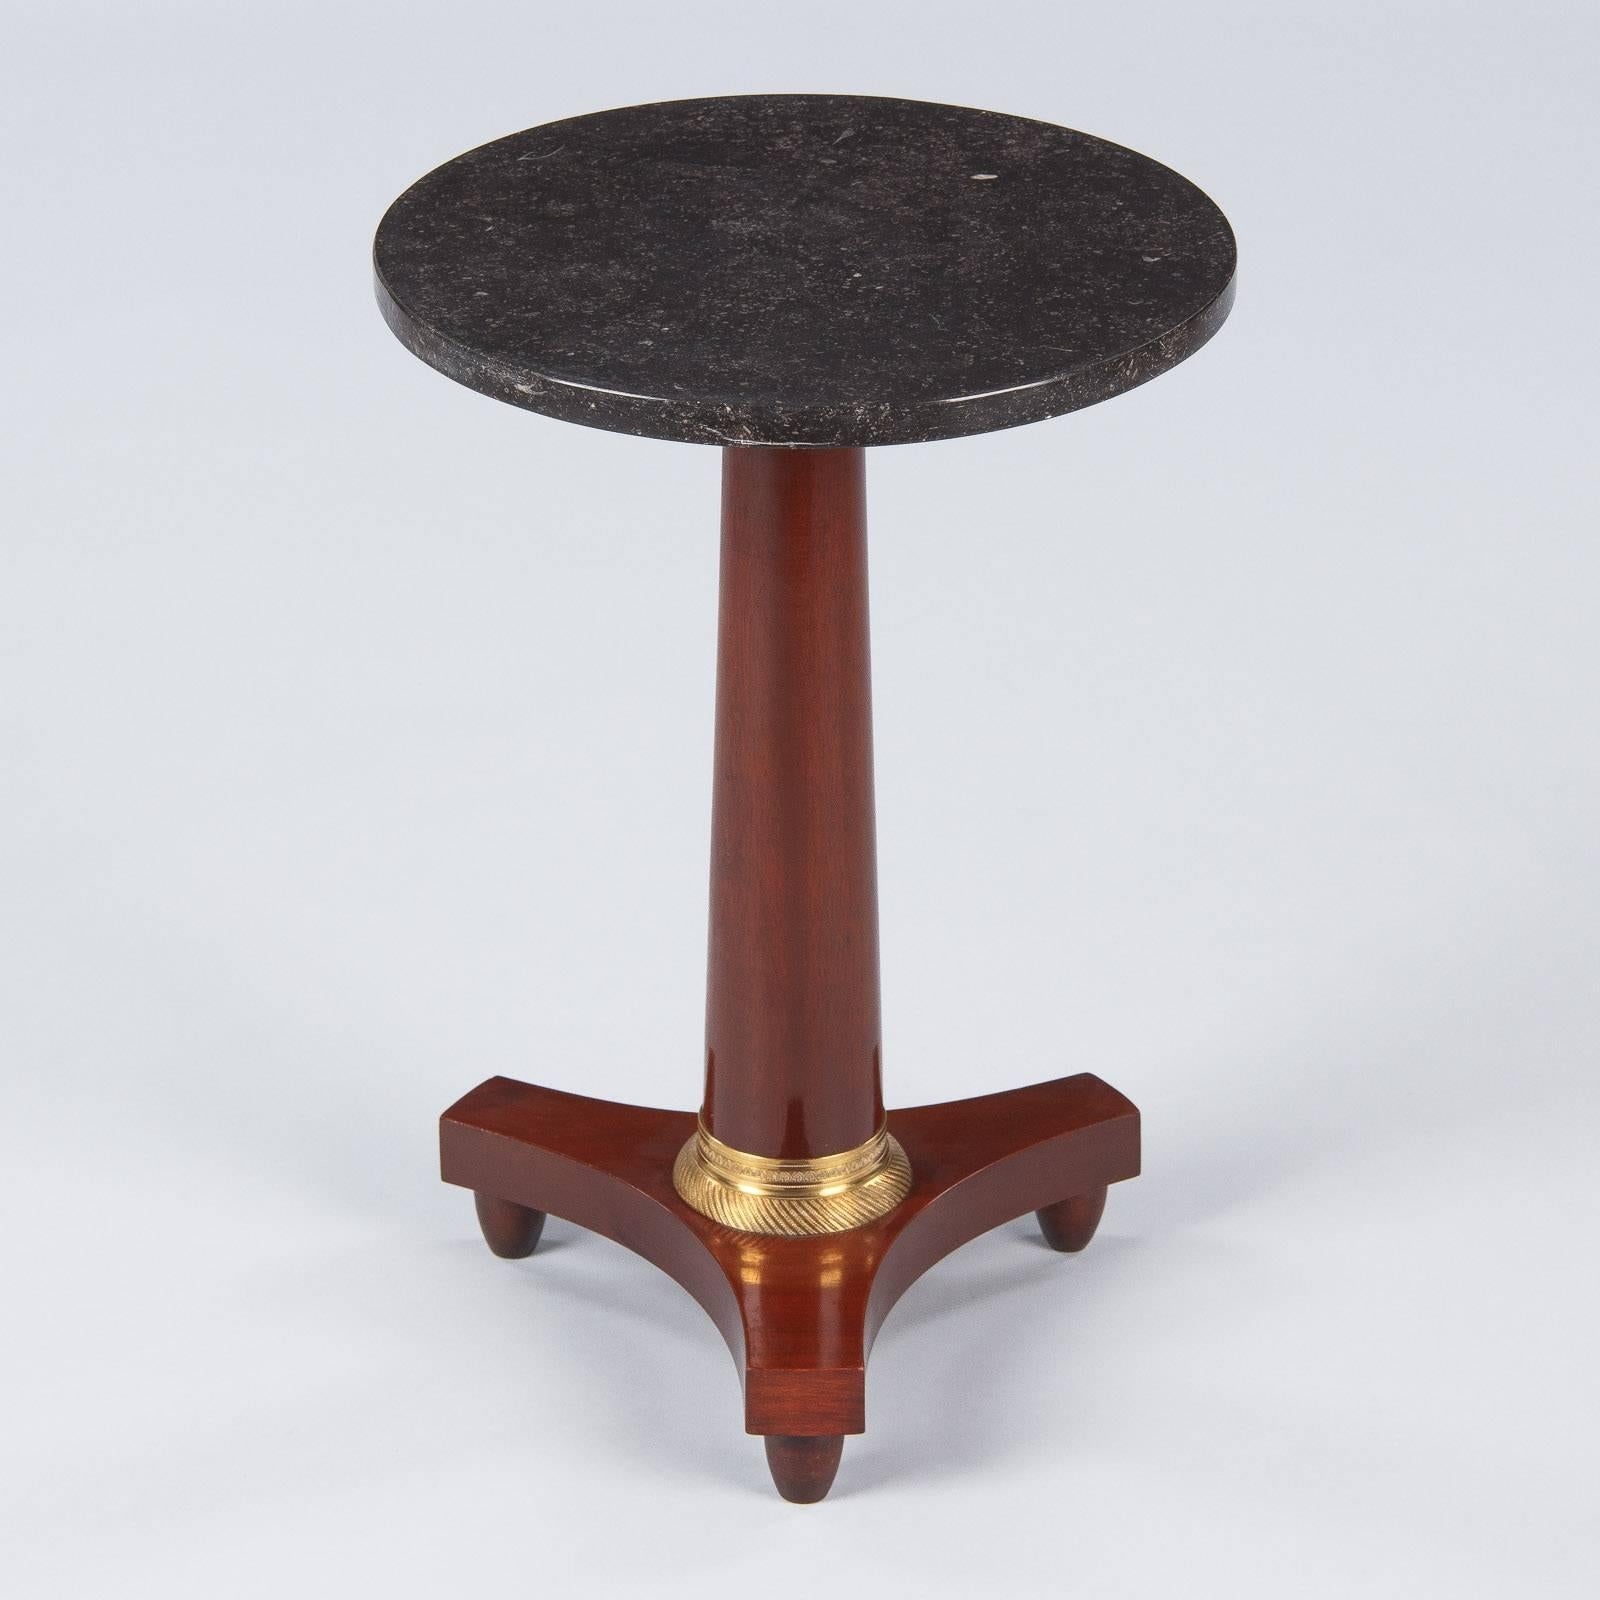 20th Century French Empire Style Marble-Top Mahogany Side Table, 1920s